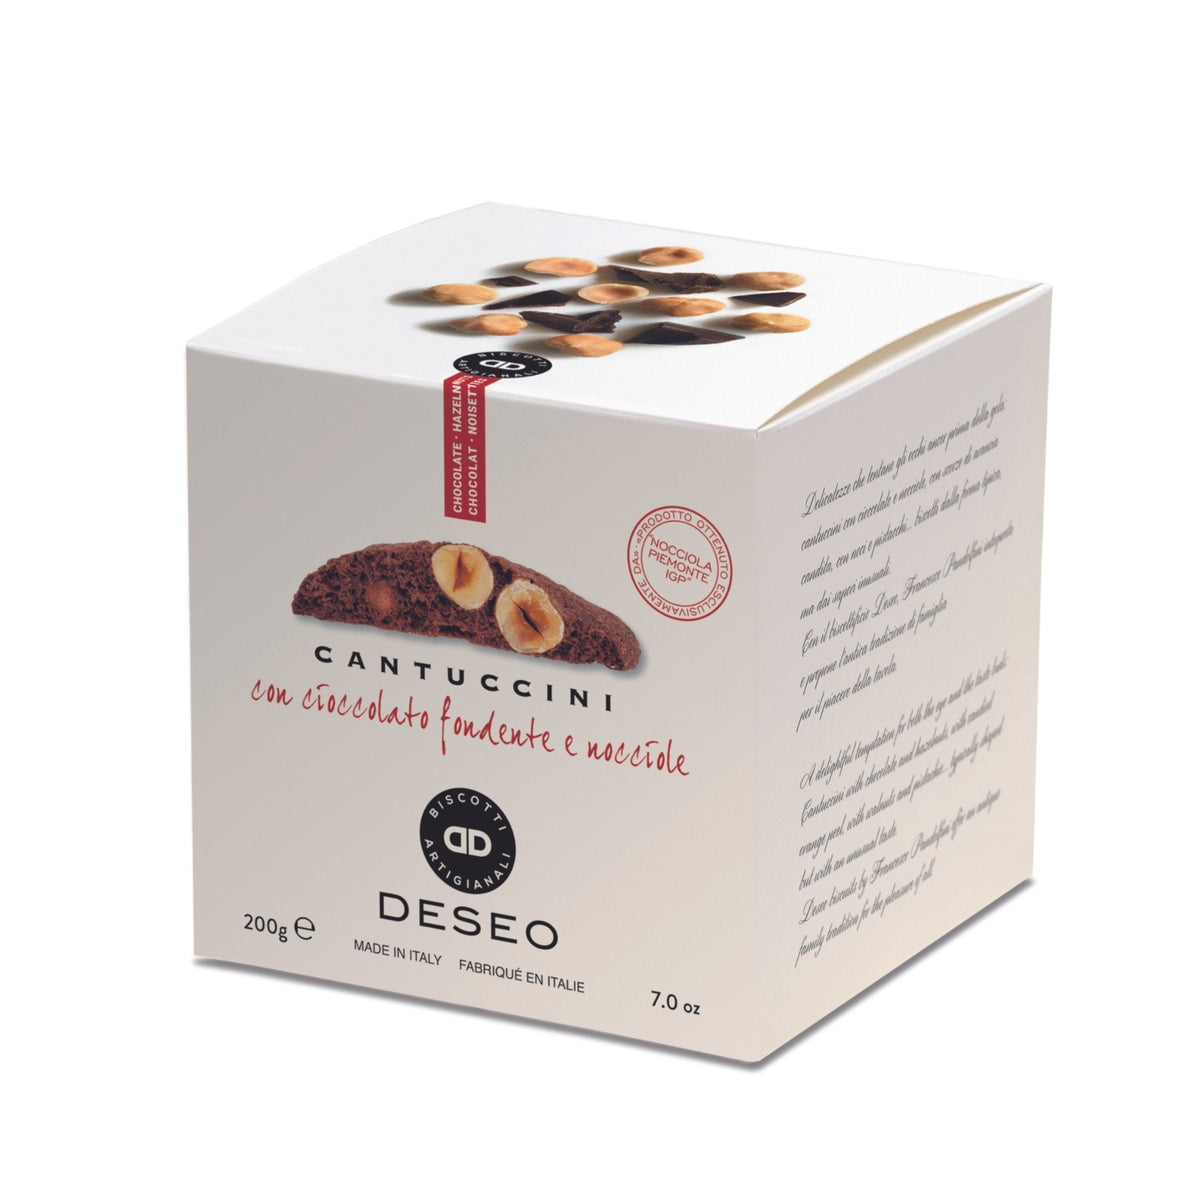 Deseo Cantuccini Toscani with Dark Chocolate &amp; PGI Hazelnuts from Piemonte 200g (Box)  | Imported and distributed in the UK by Just Gourmet Foods